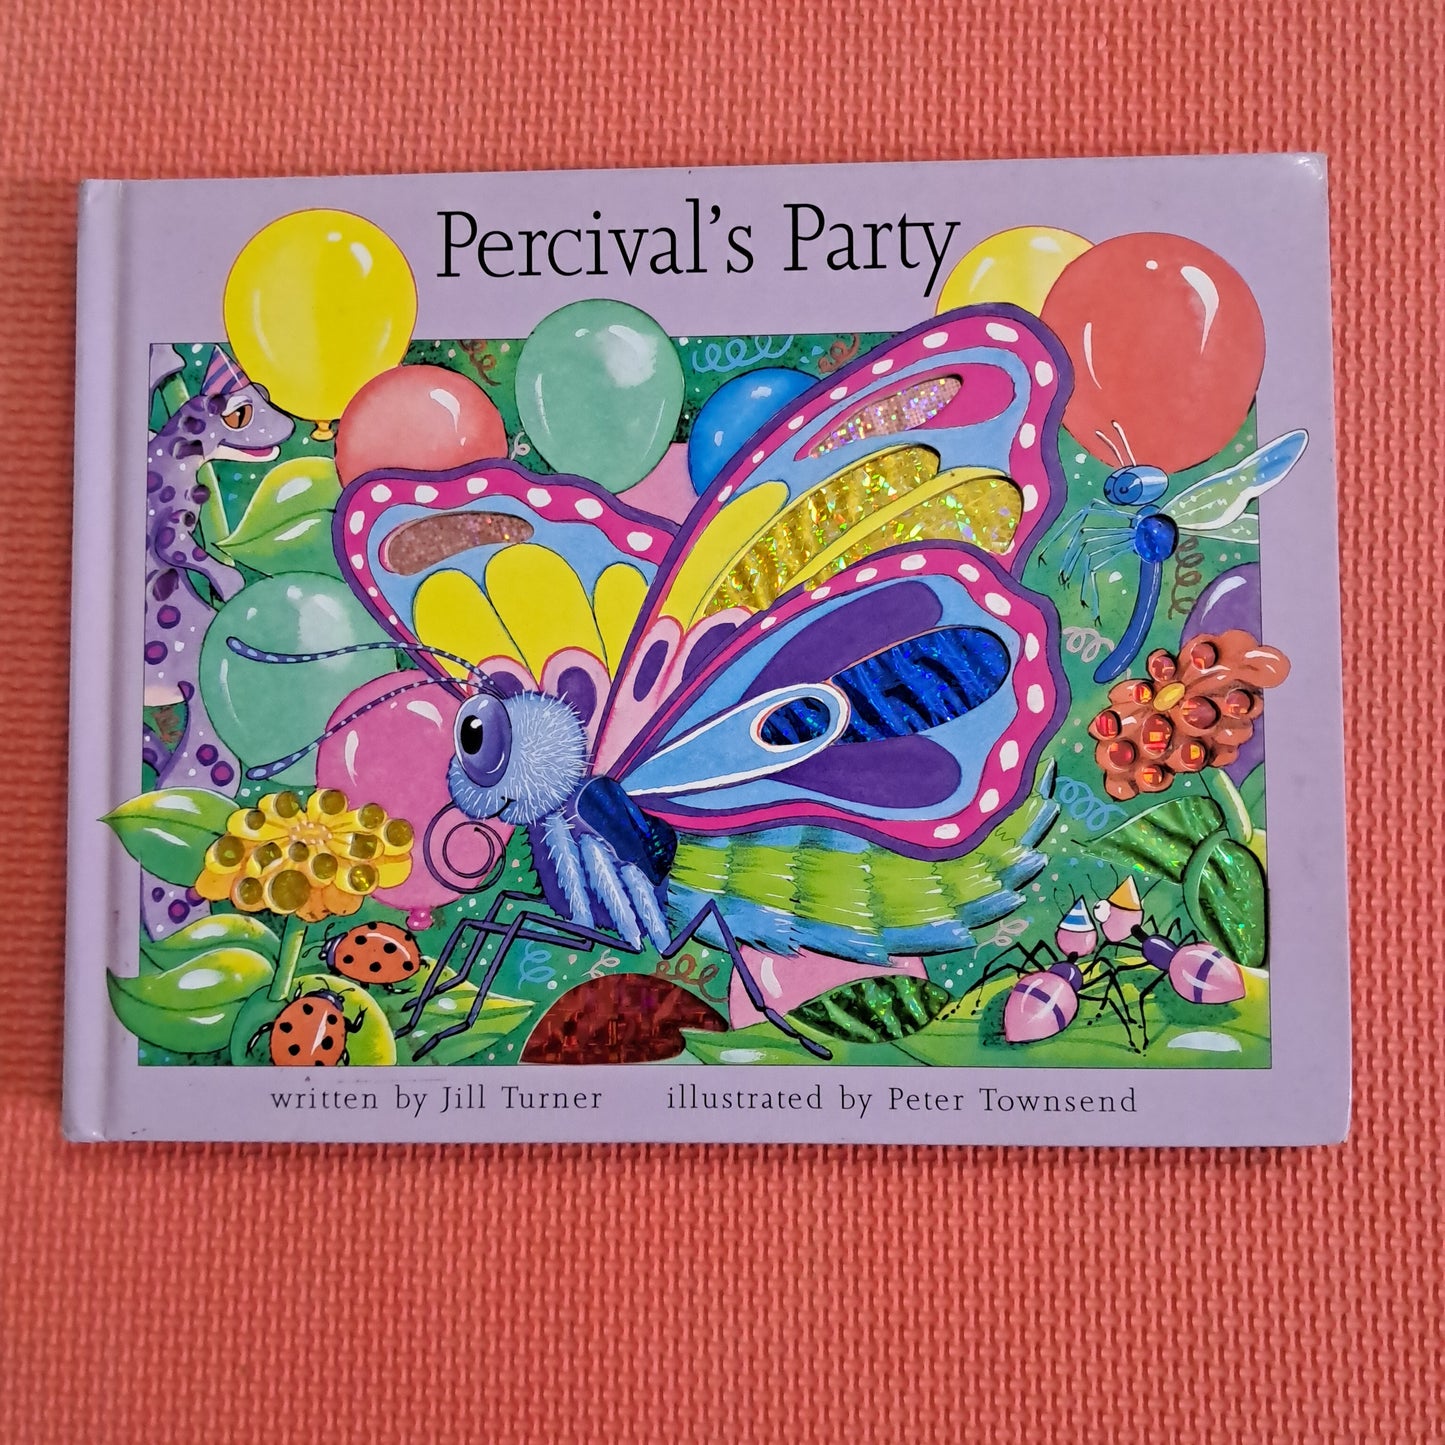 Percival's Party